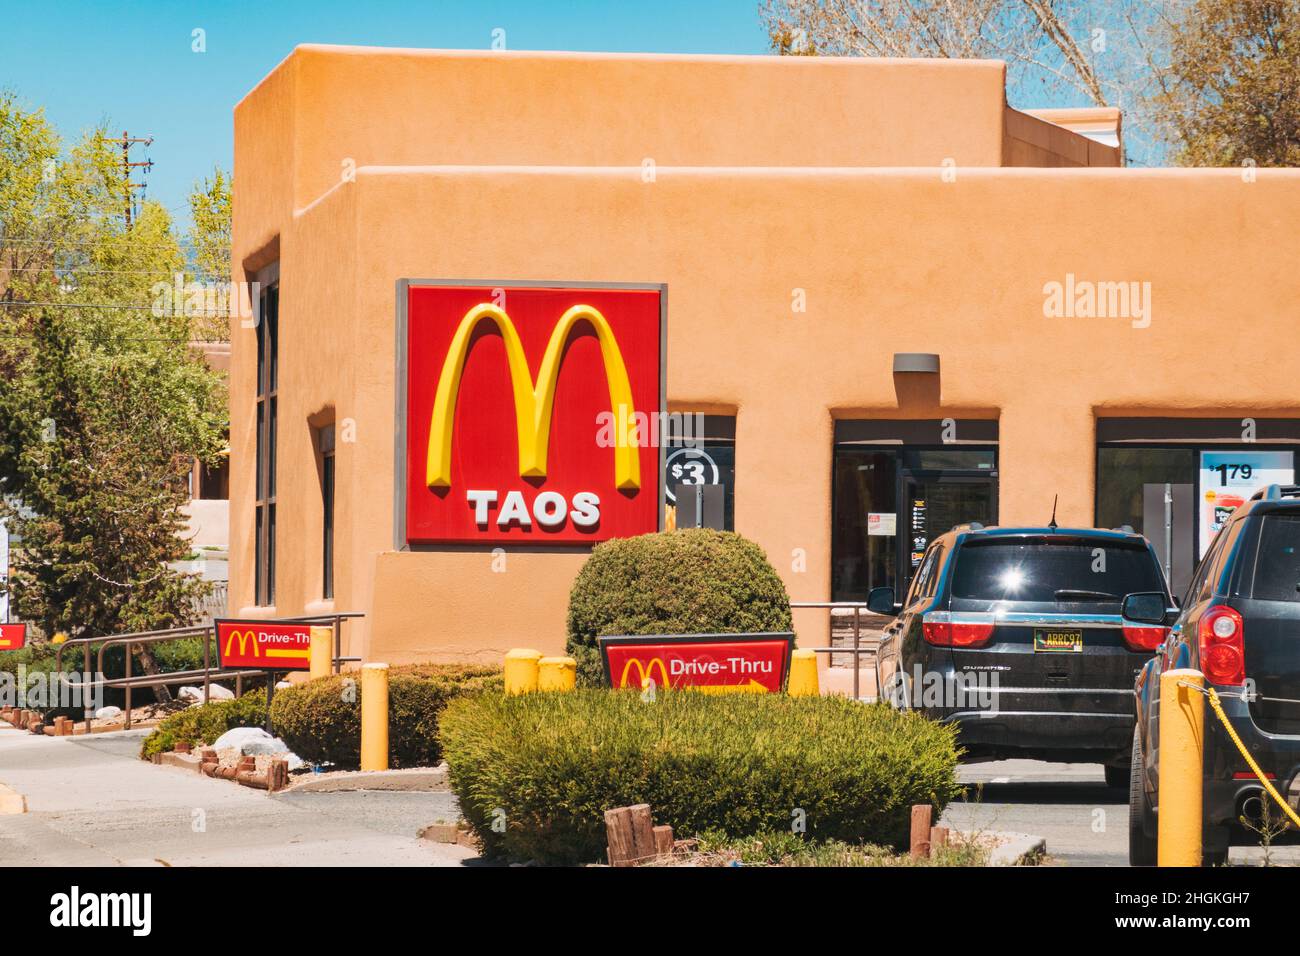 a McDonald's restaurant sign in Taos, this fast food chain location is housed in a traditional adobe styled building Stock Photo